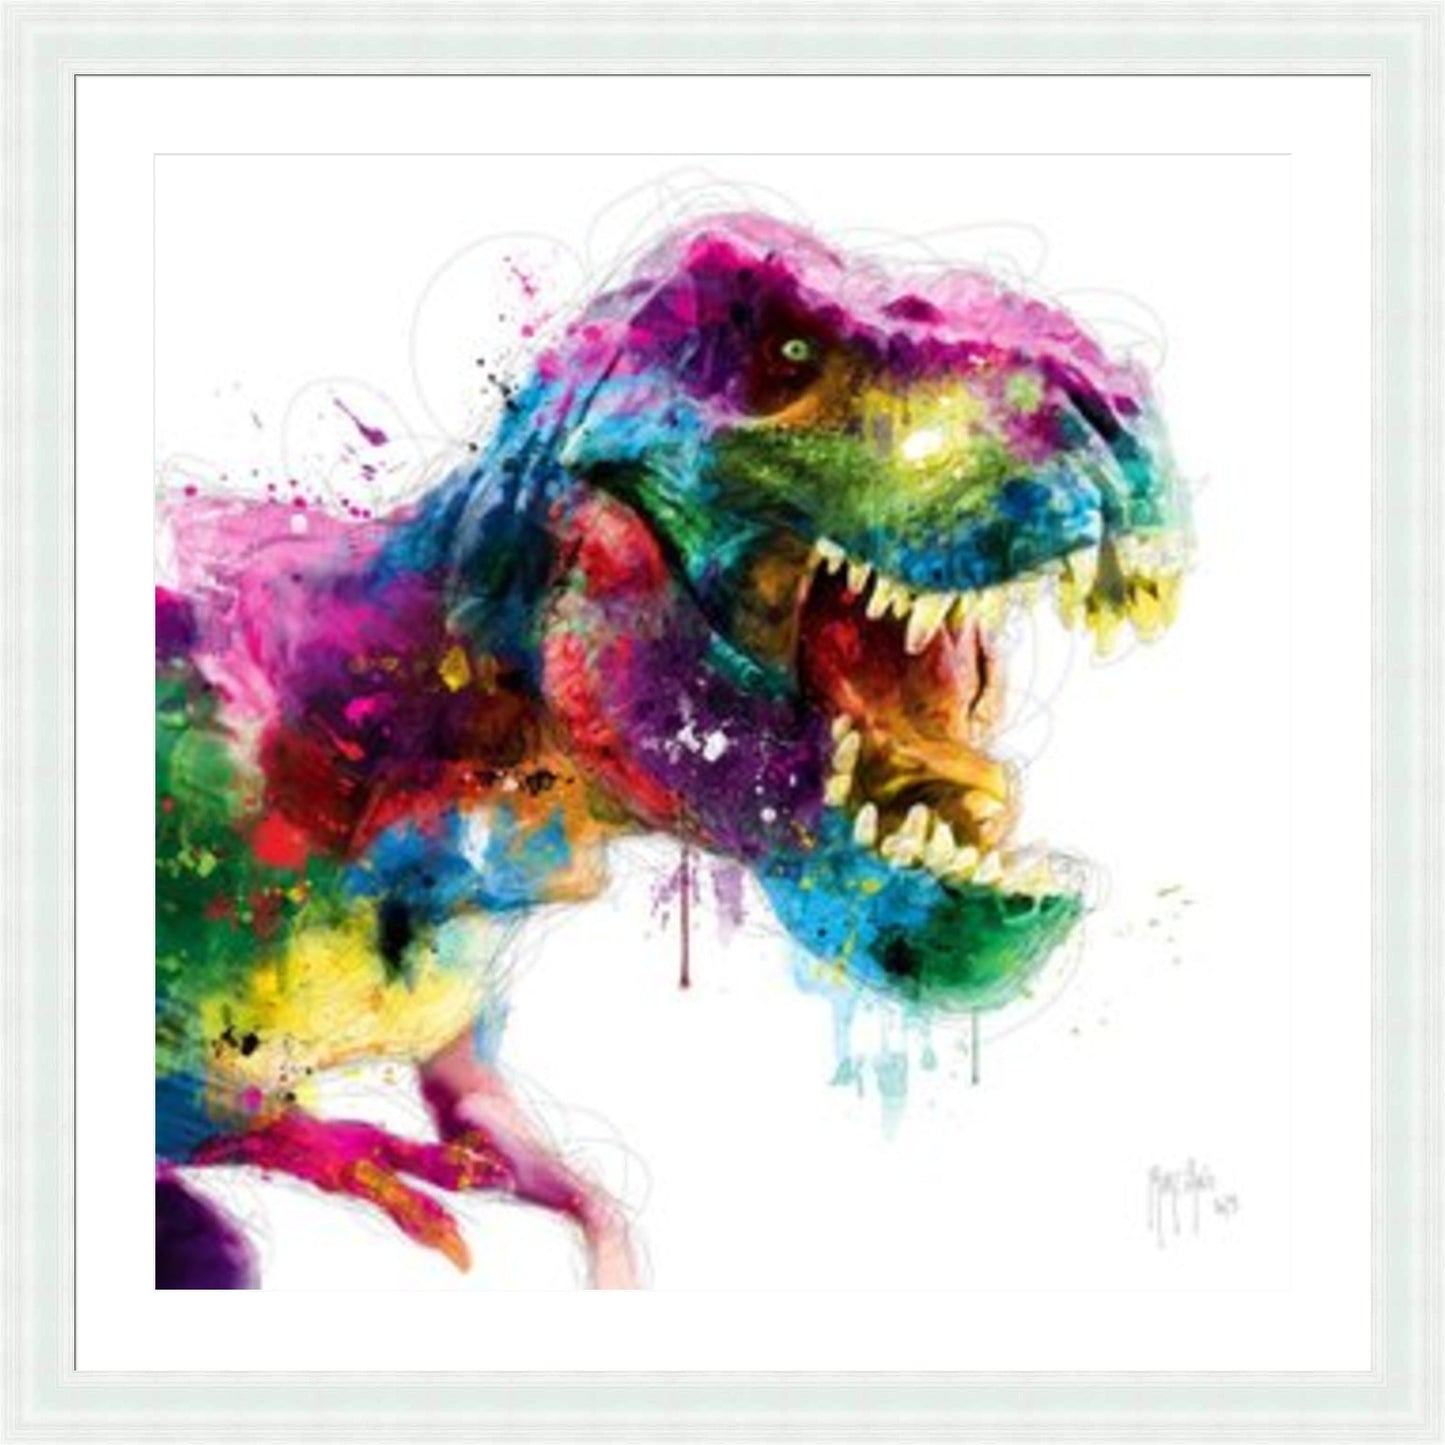 Jurassic Pop (Special Edition) by Patrice Murciano